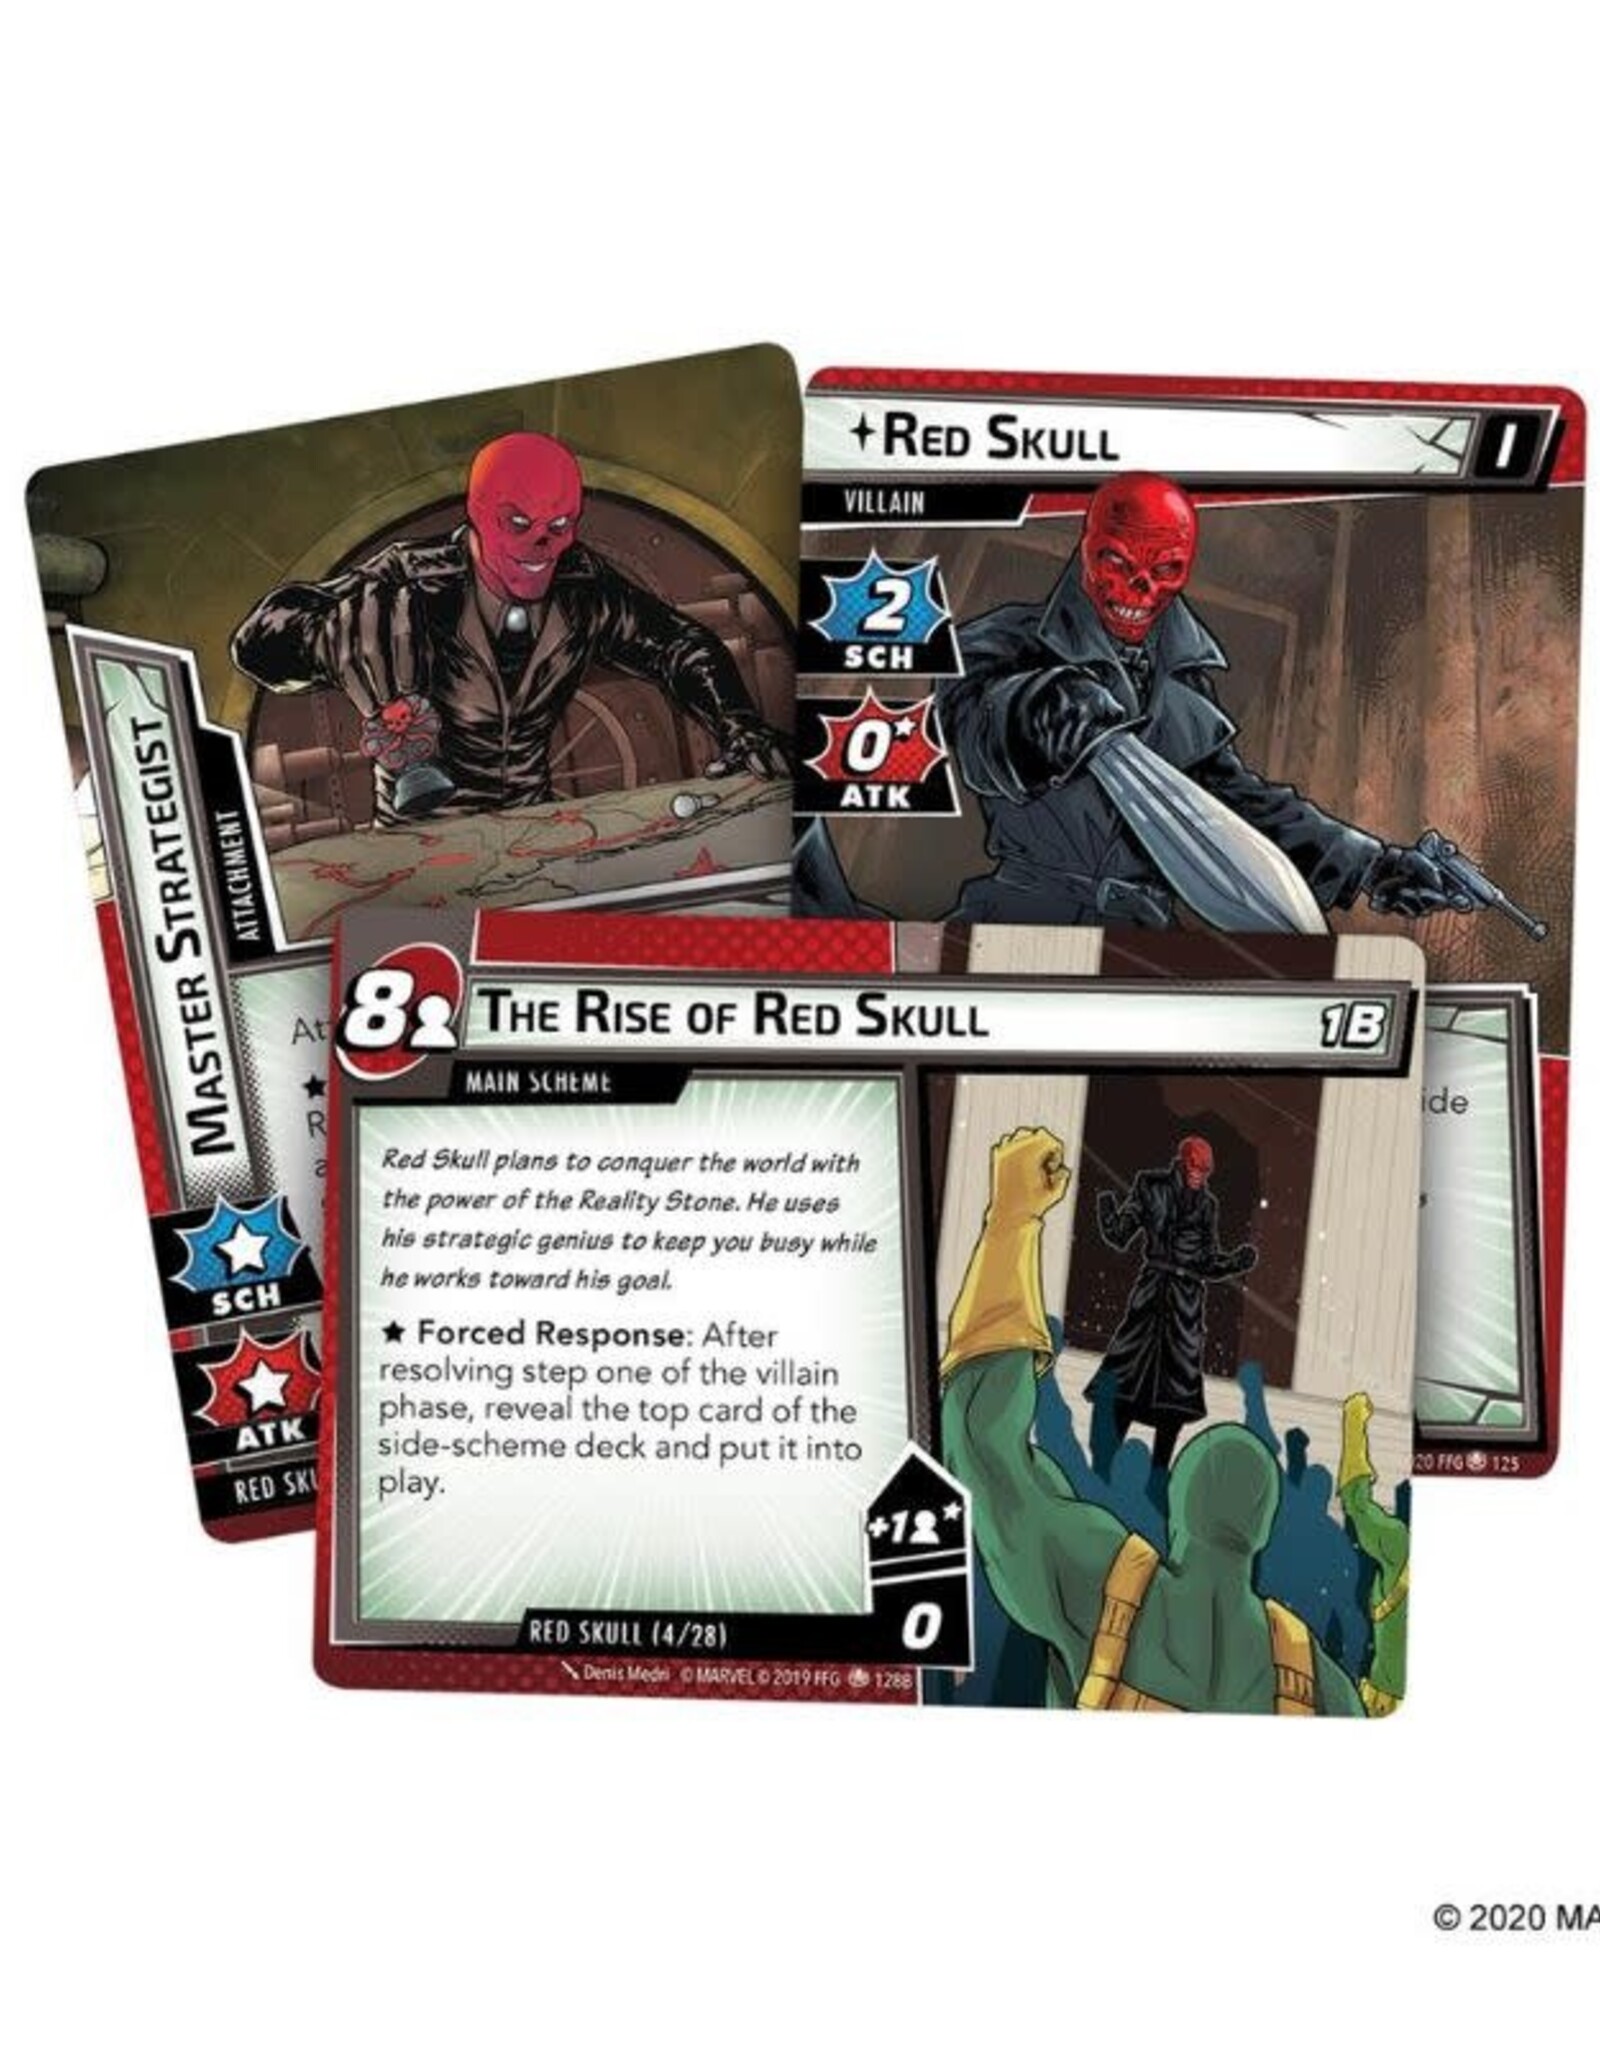 Marvel Champions LCG: Rise of the Red Skull